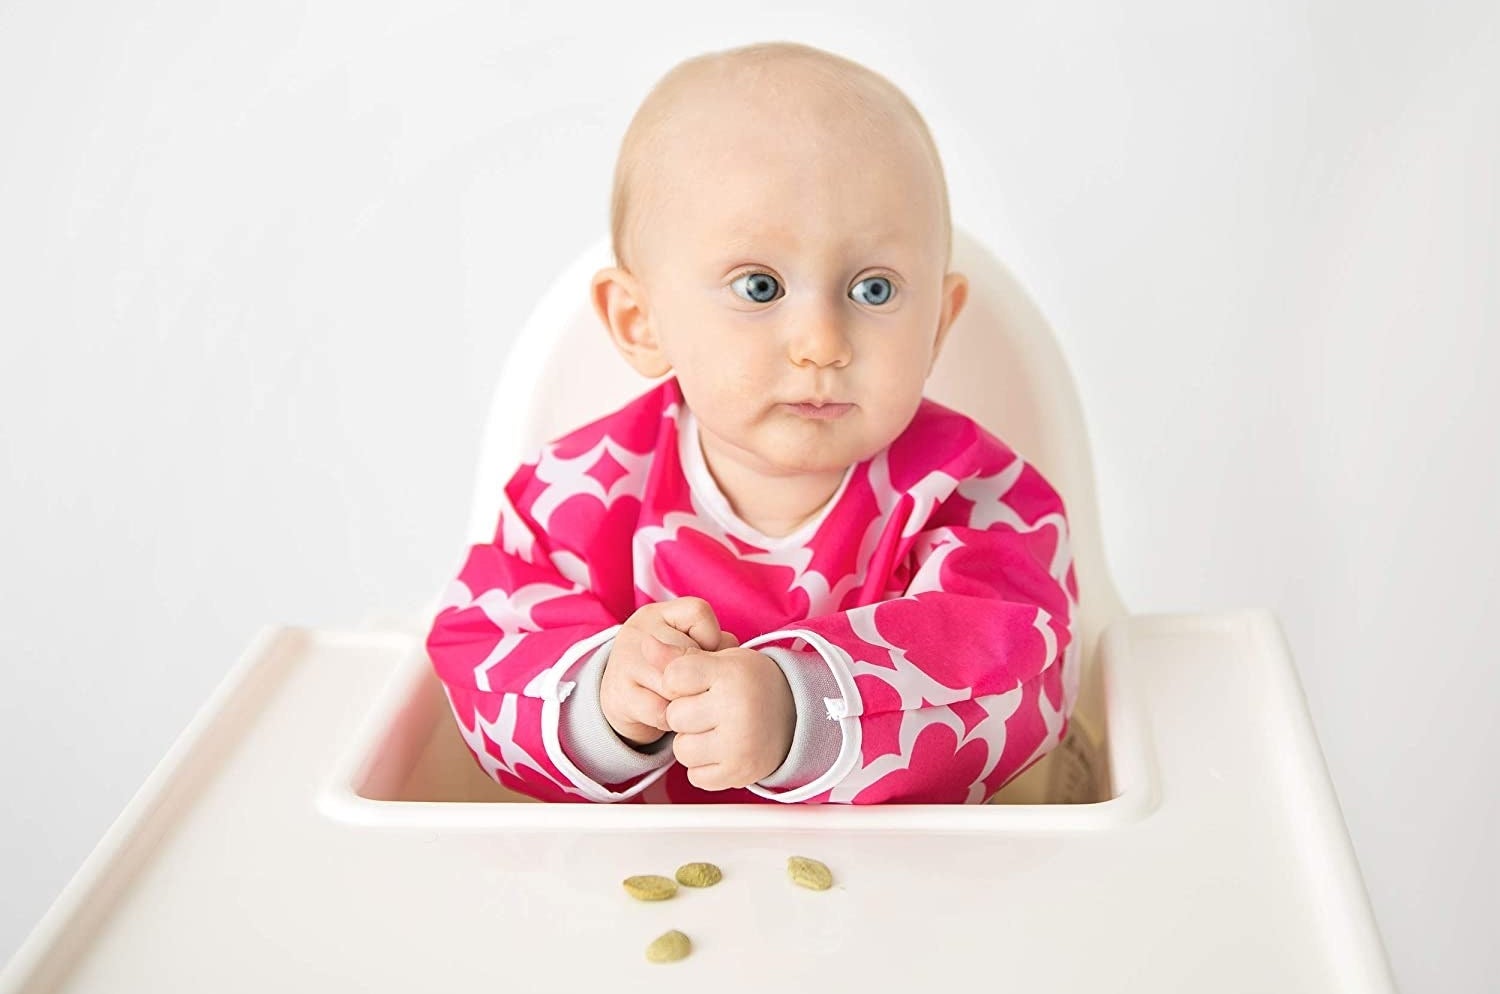 A baby sitting in a high chair with a bib on The bib has long sleeves